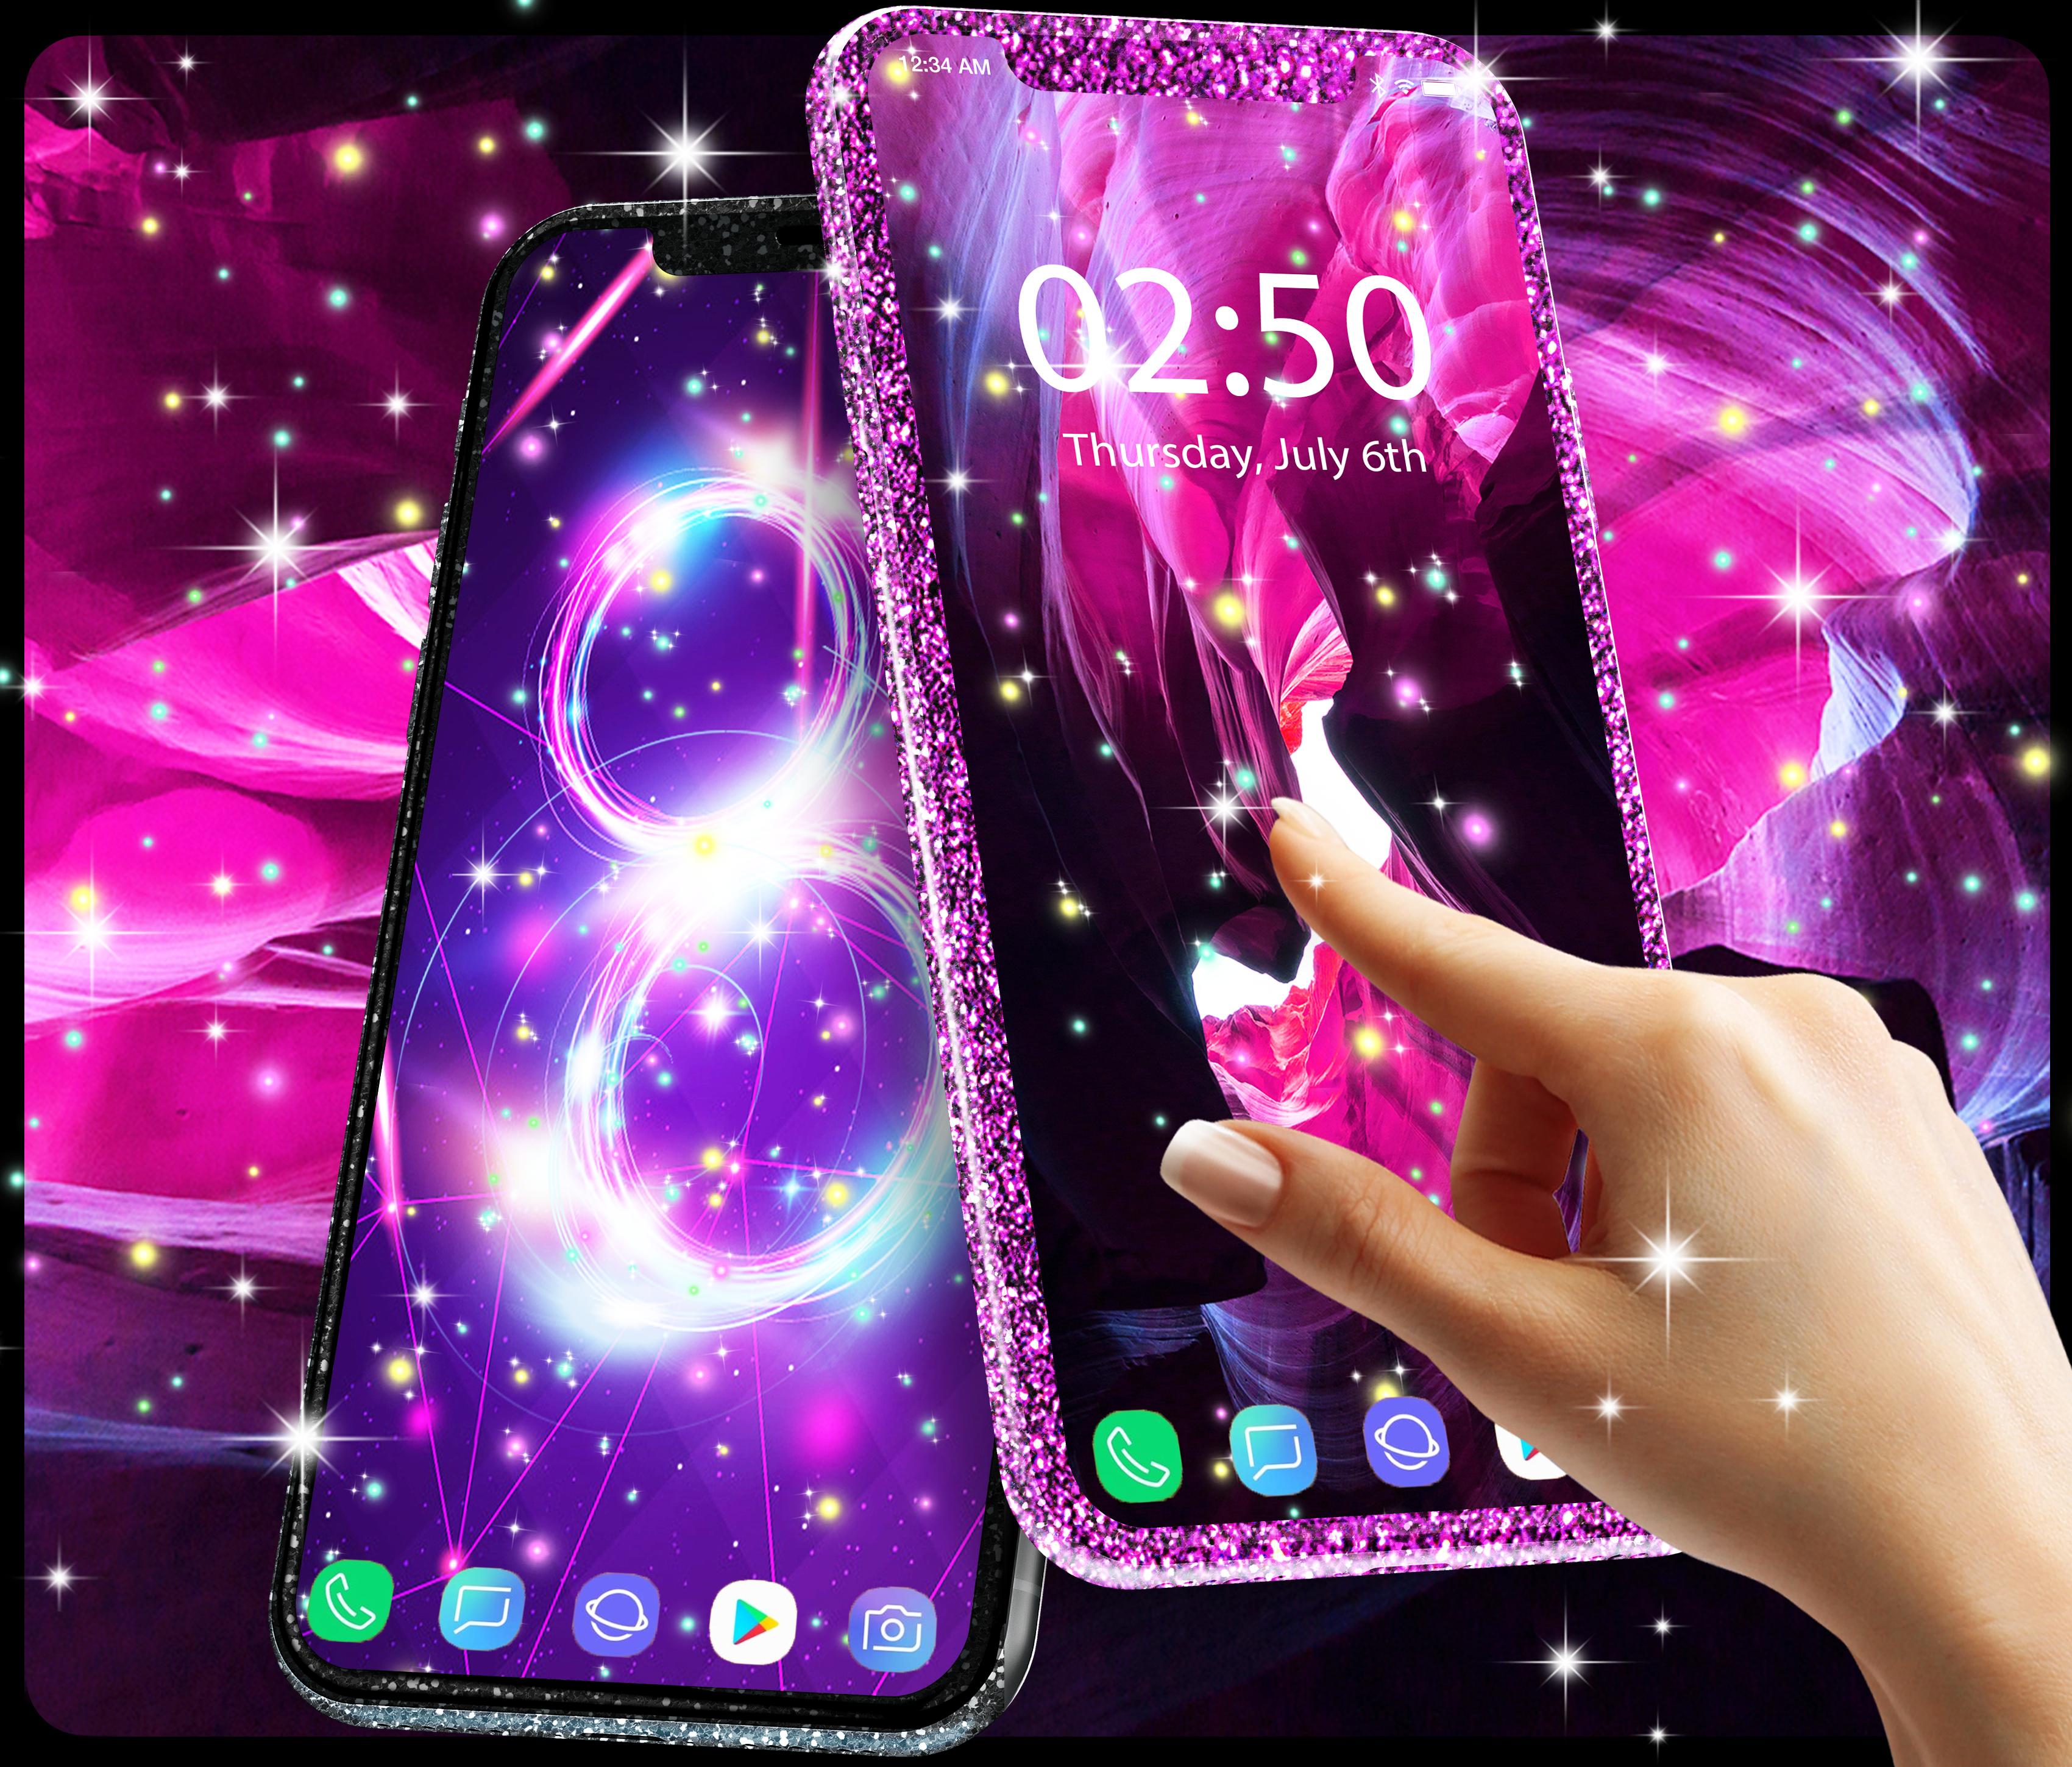 Awesome wallpapers for android for Android - APK Download